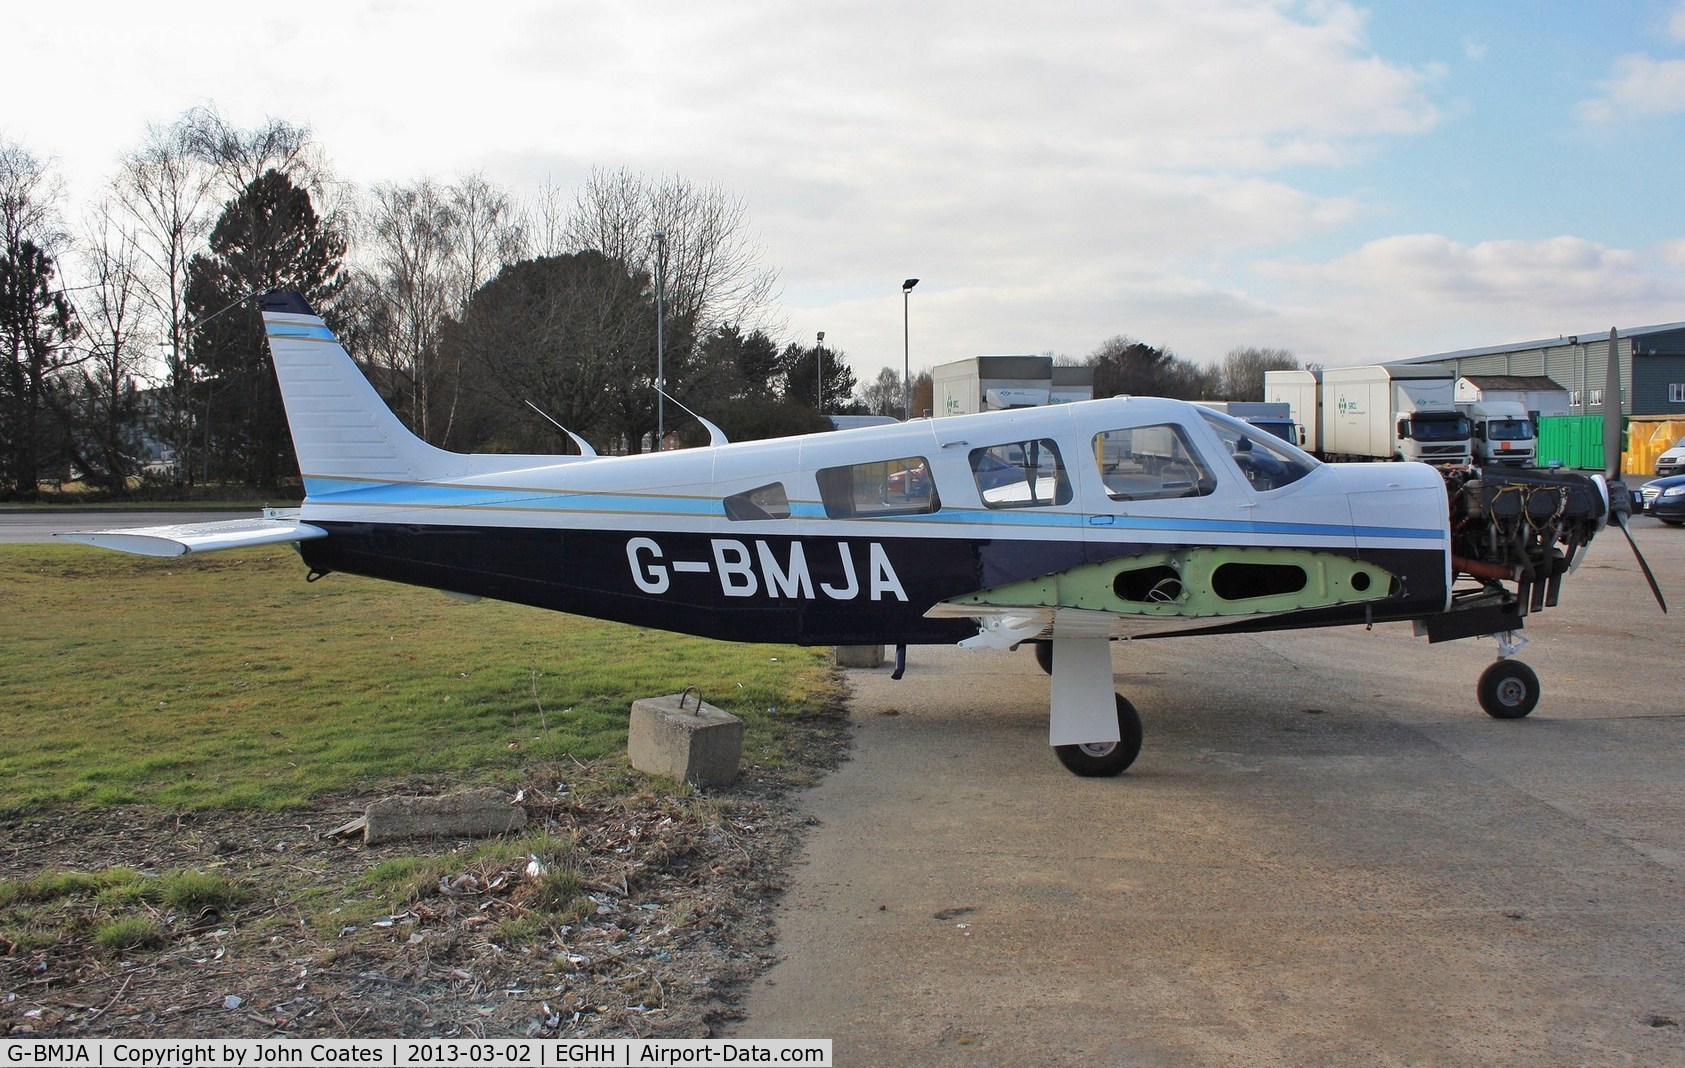 G-BMJA, 1981 Piper PA-32R-301 Saratoga SP C/N 32R-8113019, Just repainted